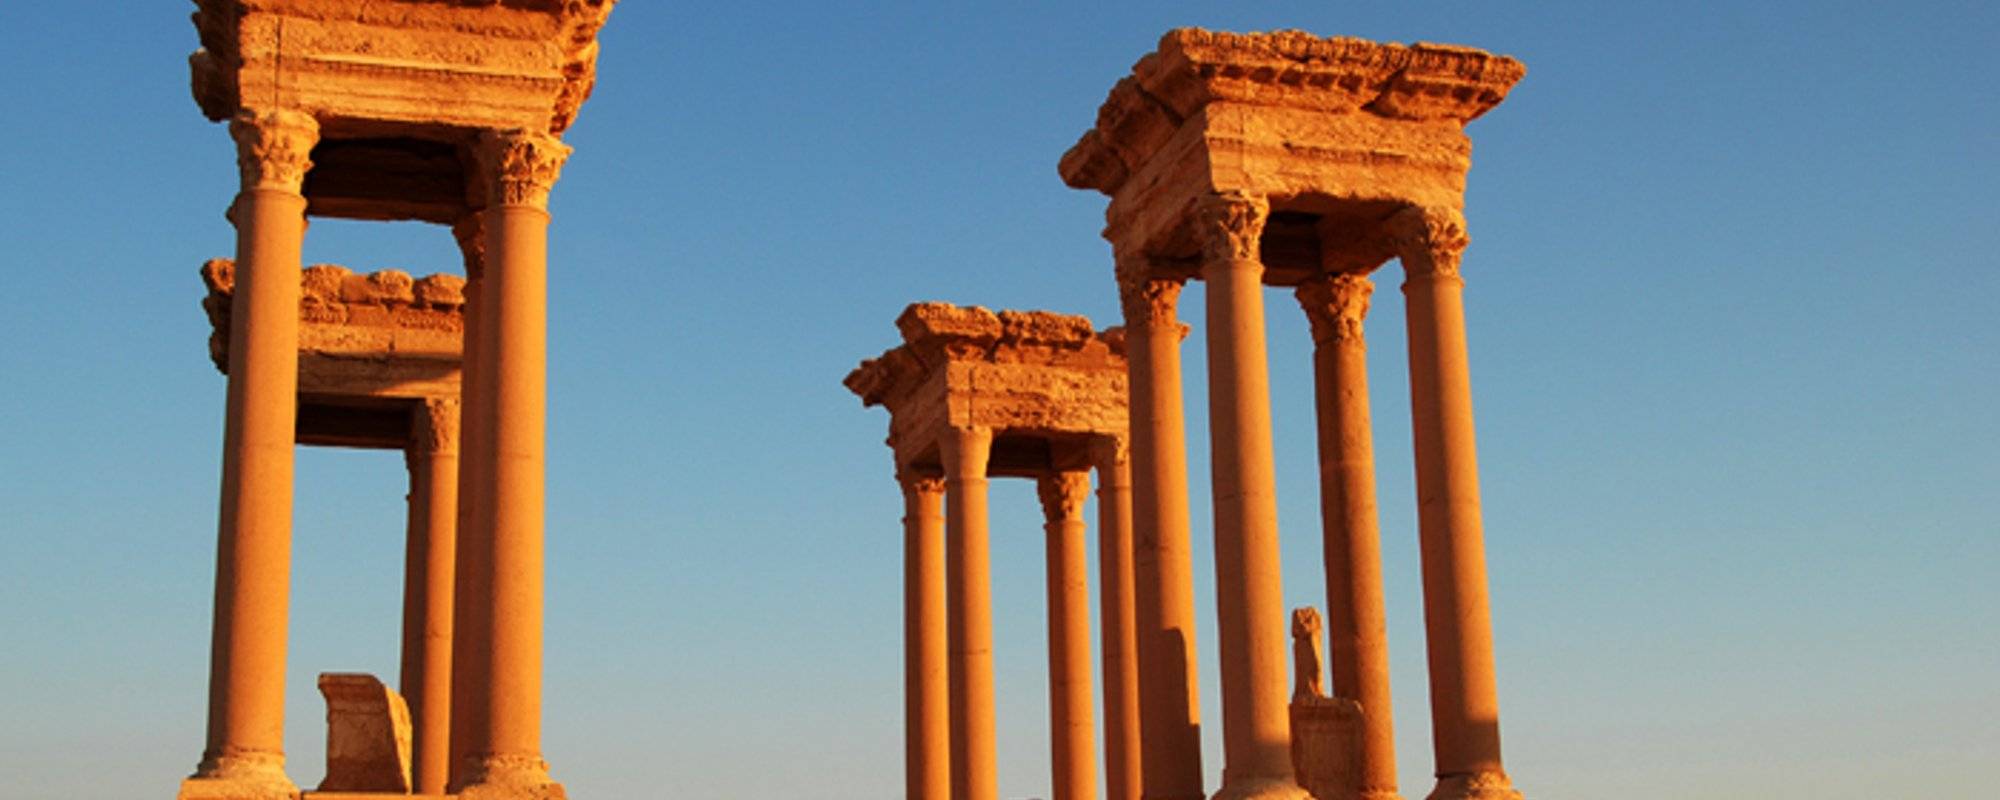 PALMYRA – ancient city in the Syrian desert